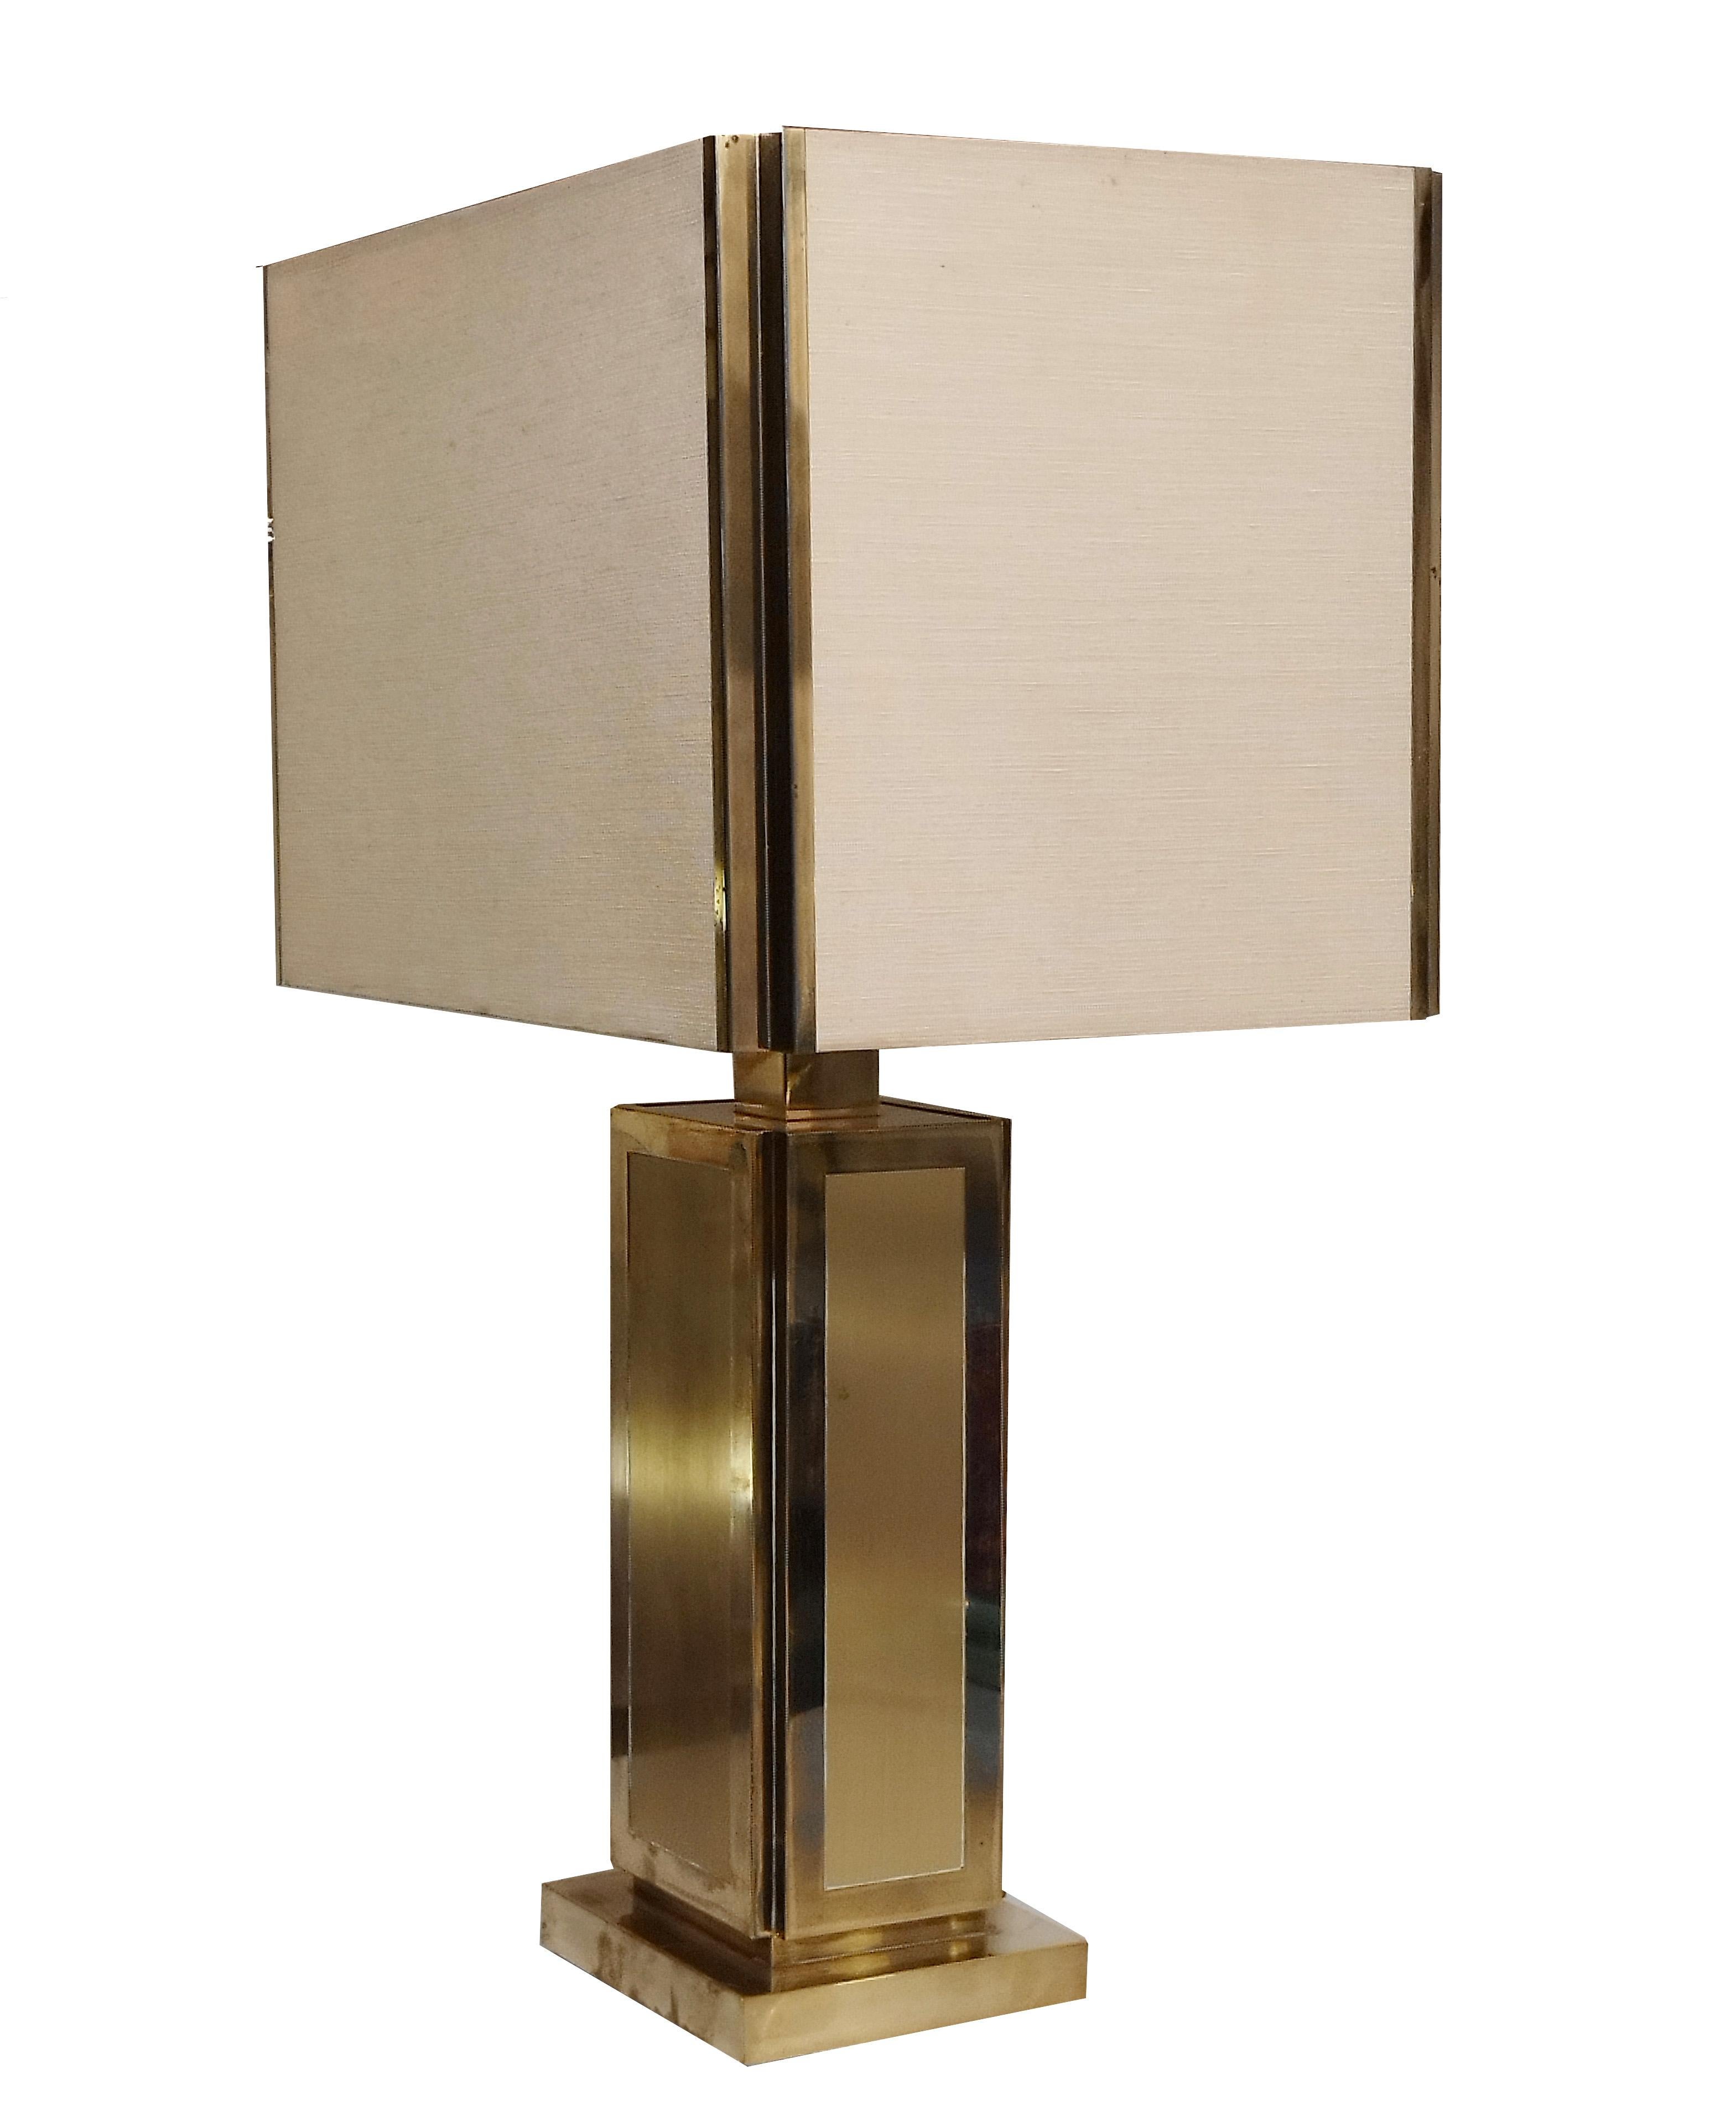 Original shades (with some small stains) & brass angular corners included.
Total height with shades 80 cm. Double light switch (one for the two lateral E27 light bulbs and one E27 light bulb for toward the ceiling). Marked Liwan's Rome on the lamp